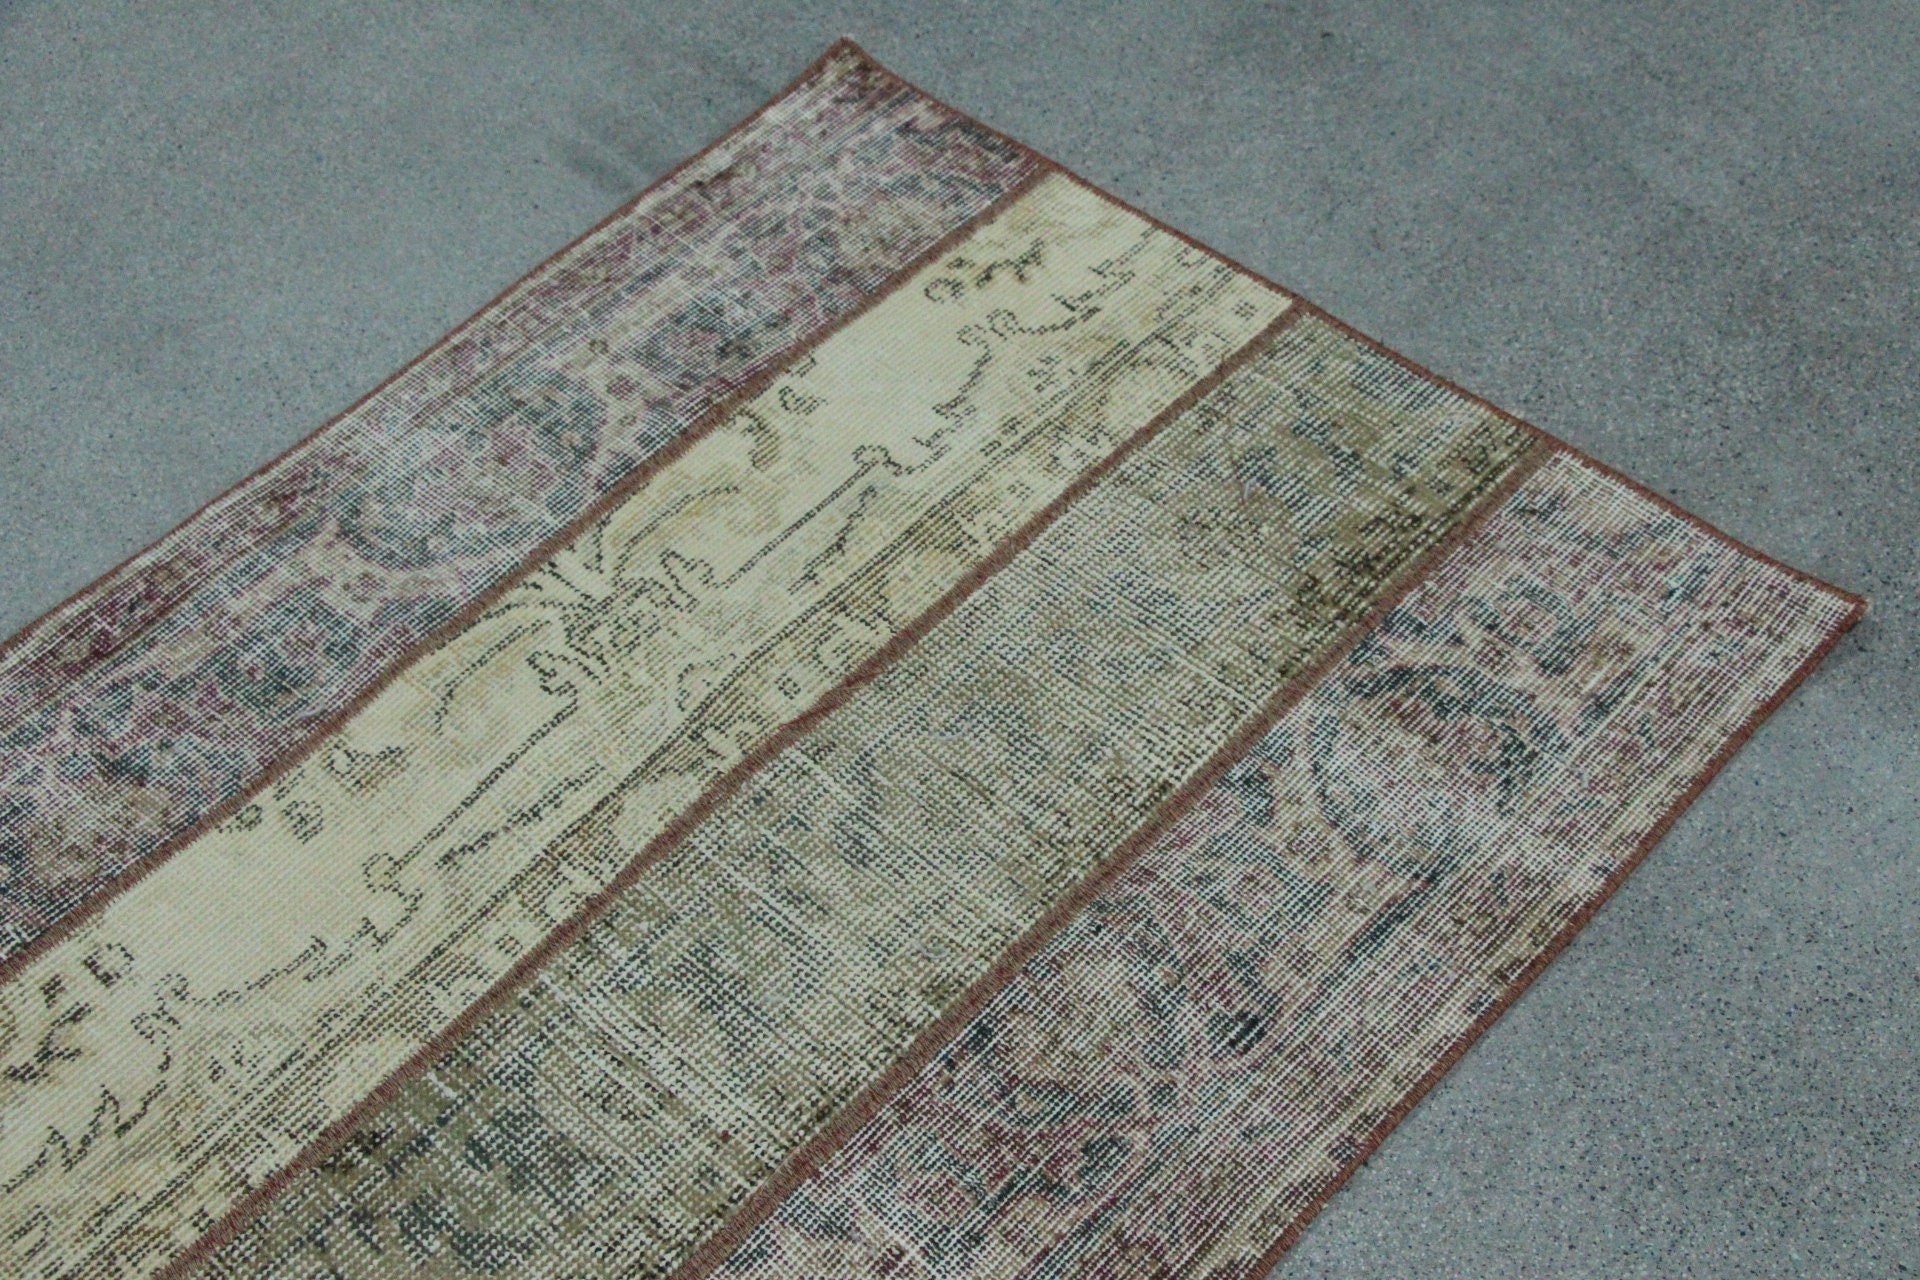 Outdoor Rug, Green Floor Rug, Rugs for Kitchen, 2.7x6.1 ft Accent Rugs, Vintage Rugs, Bedroom Rug, Kitchen Rugs, Turkish Rug, Cool Rugs